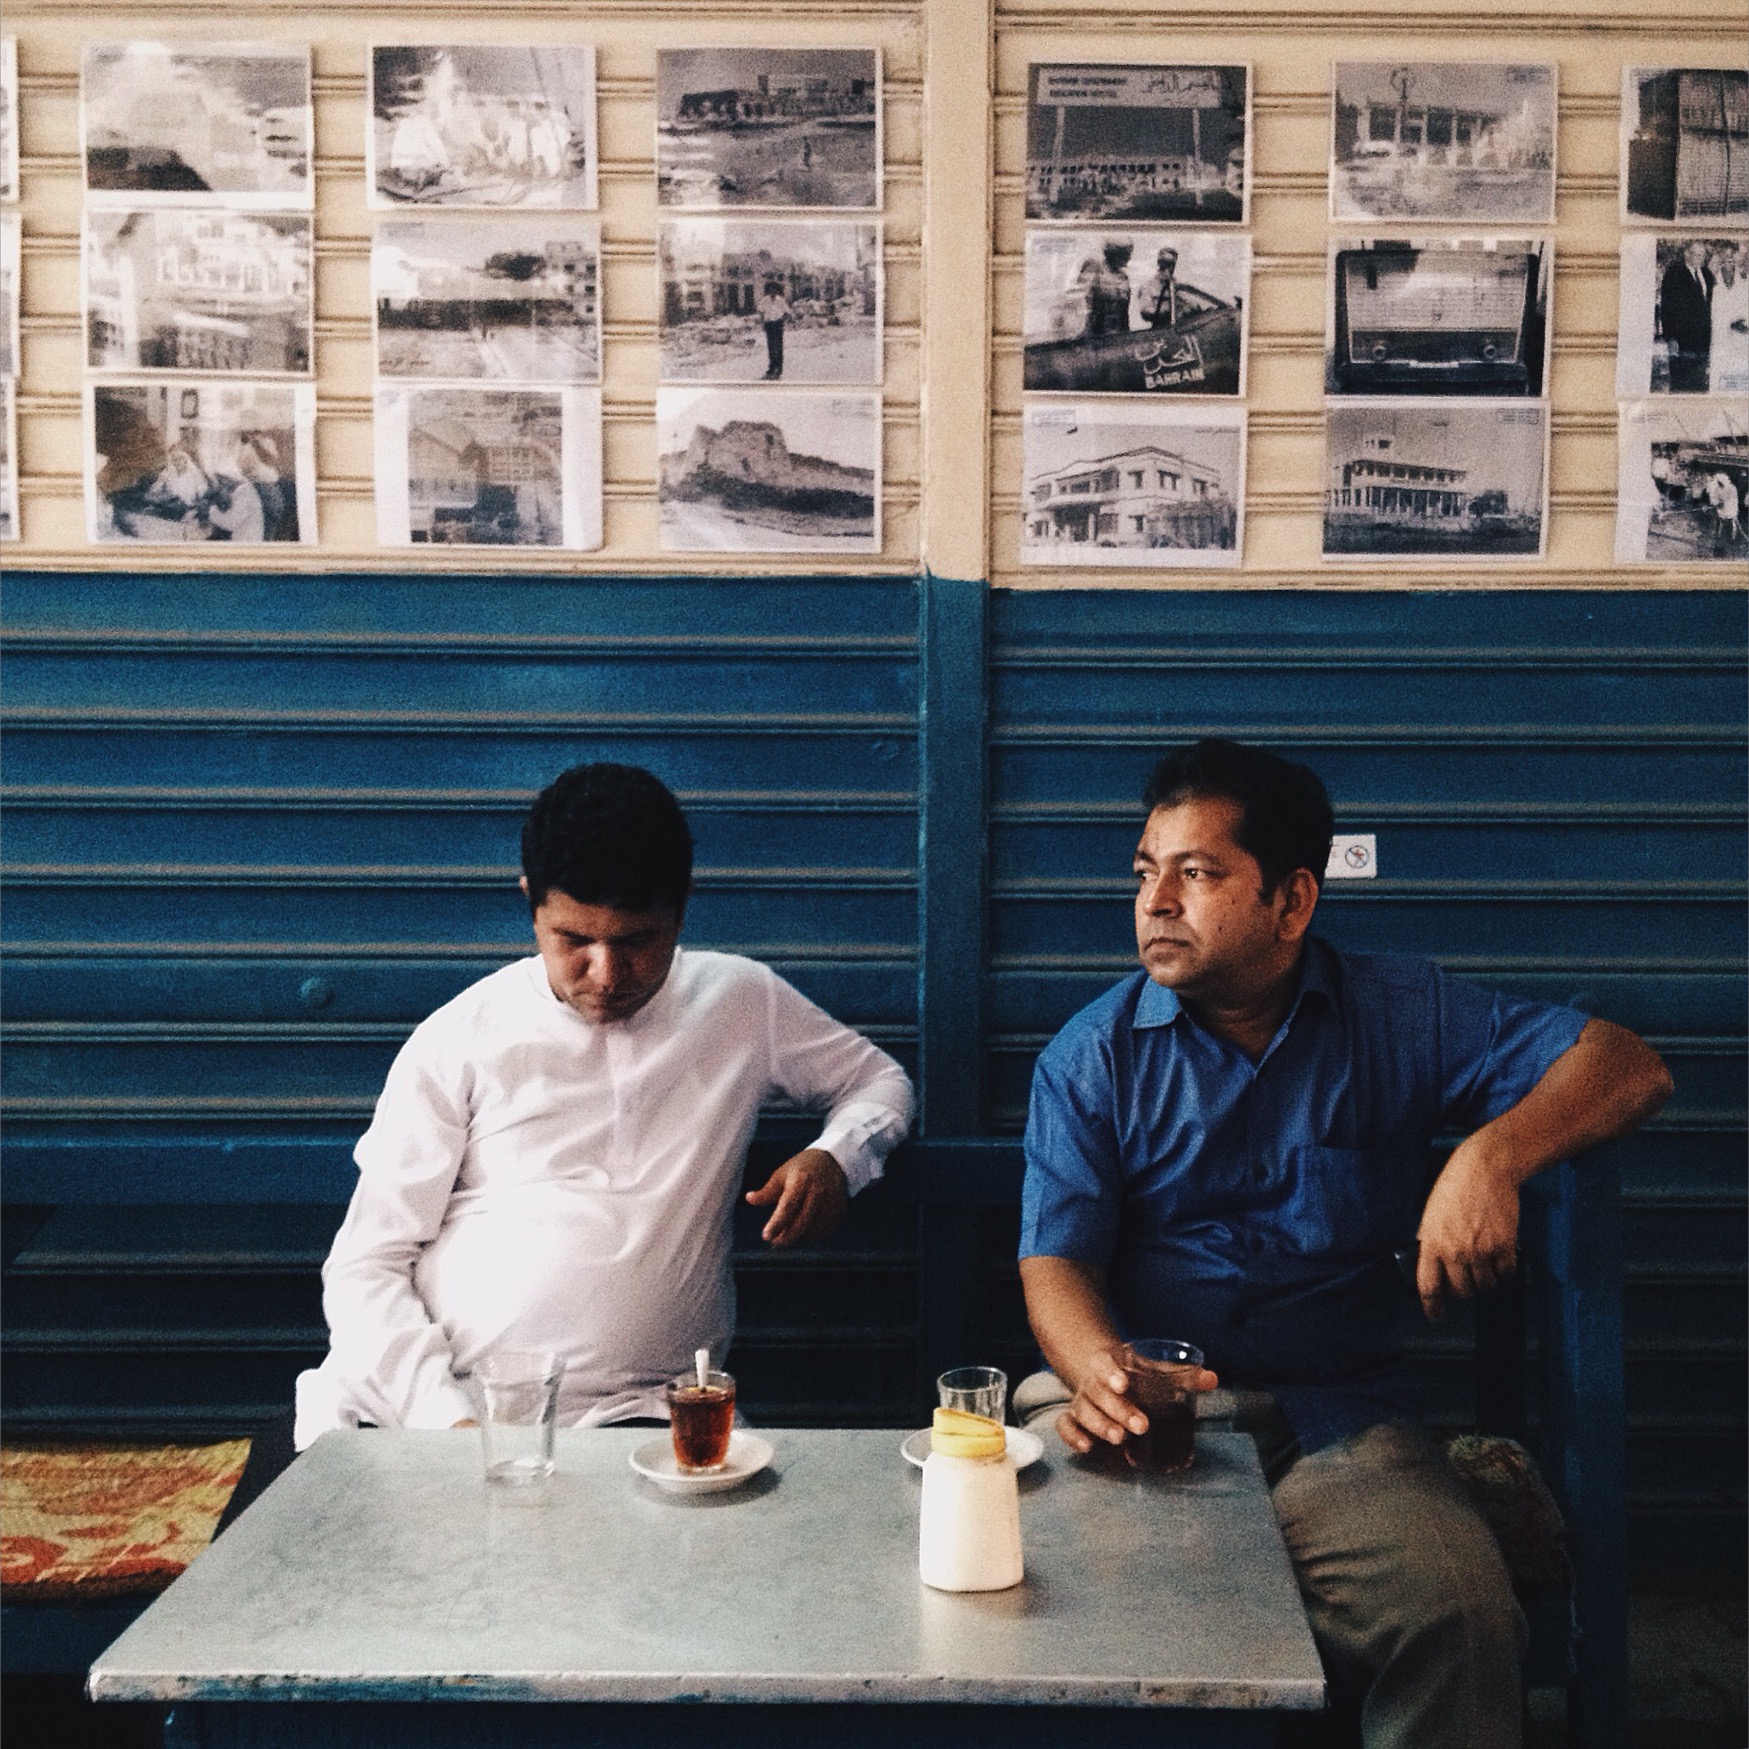 On holidays or after work, workers find refuge in local cafes, drinking tea and socializing. 